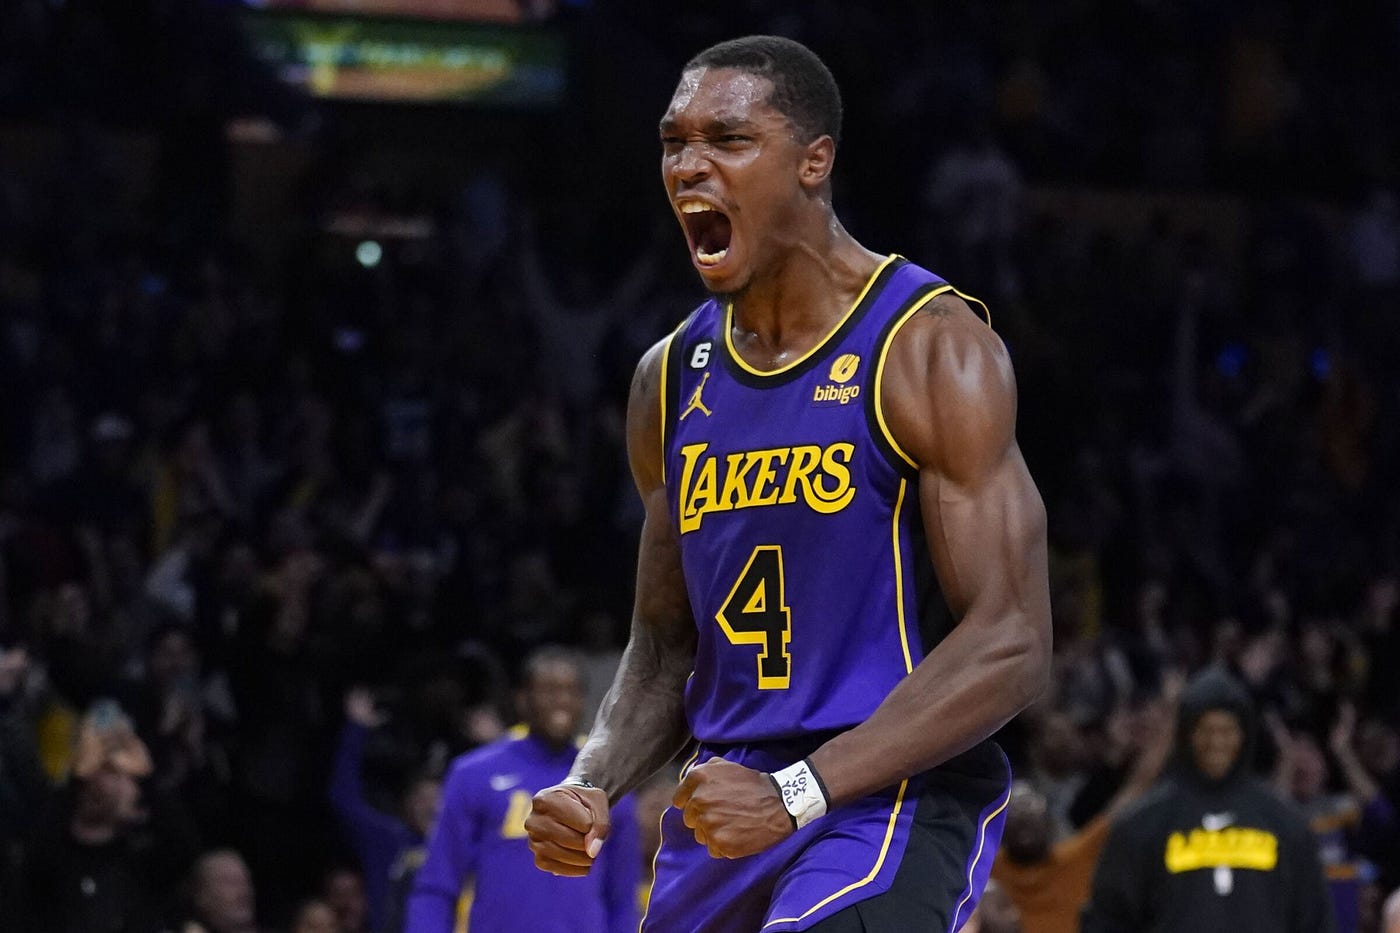 Lakers rally past Warriors in Game 4, take 3-1 series lead